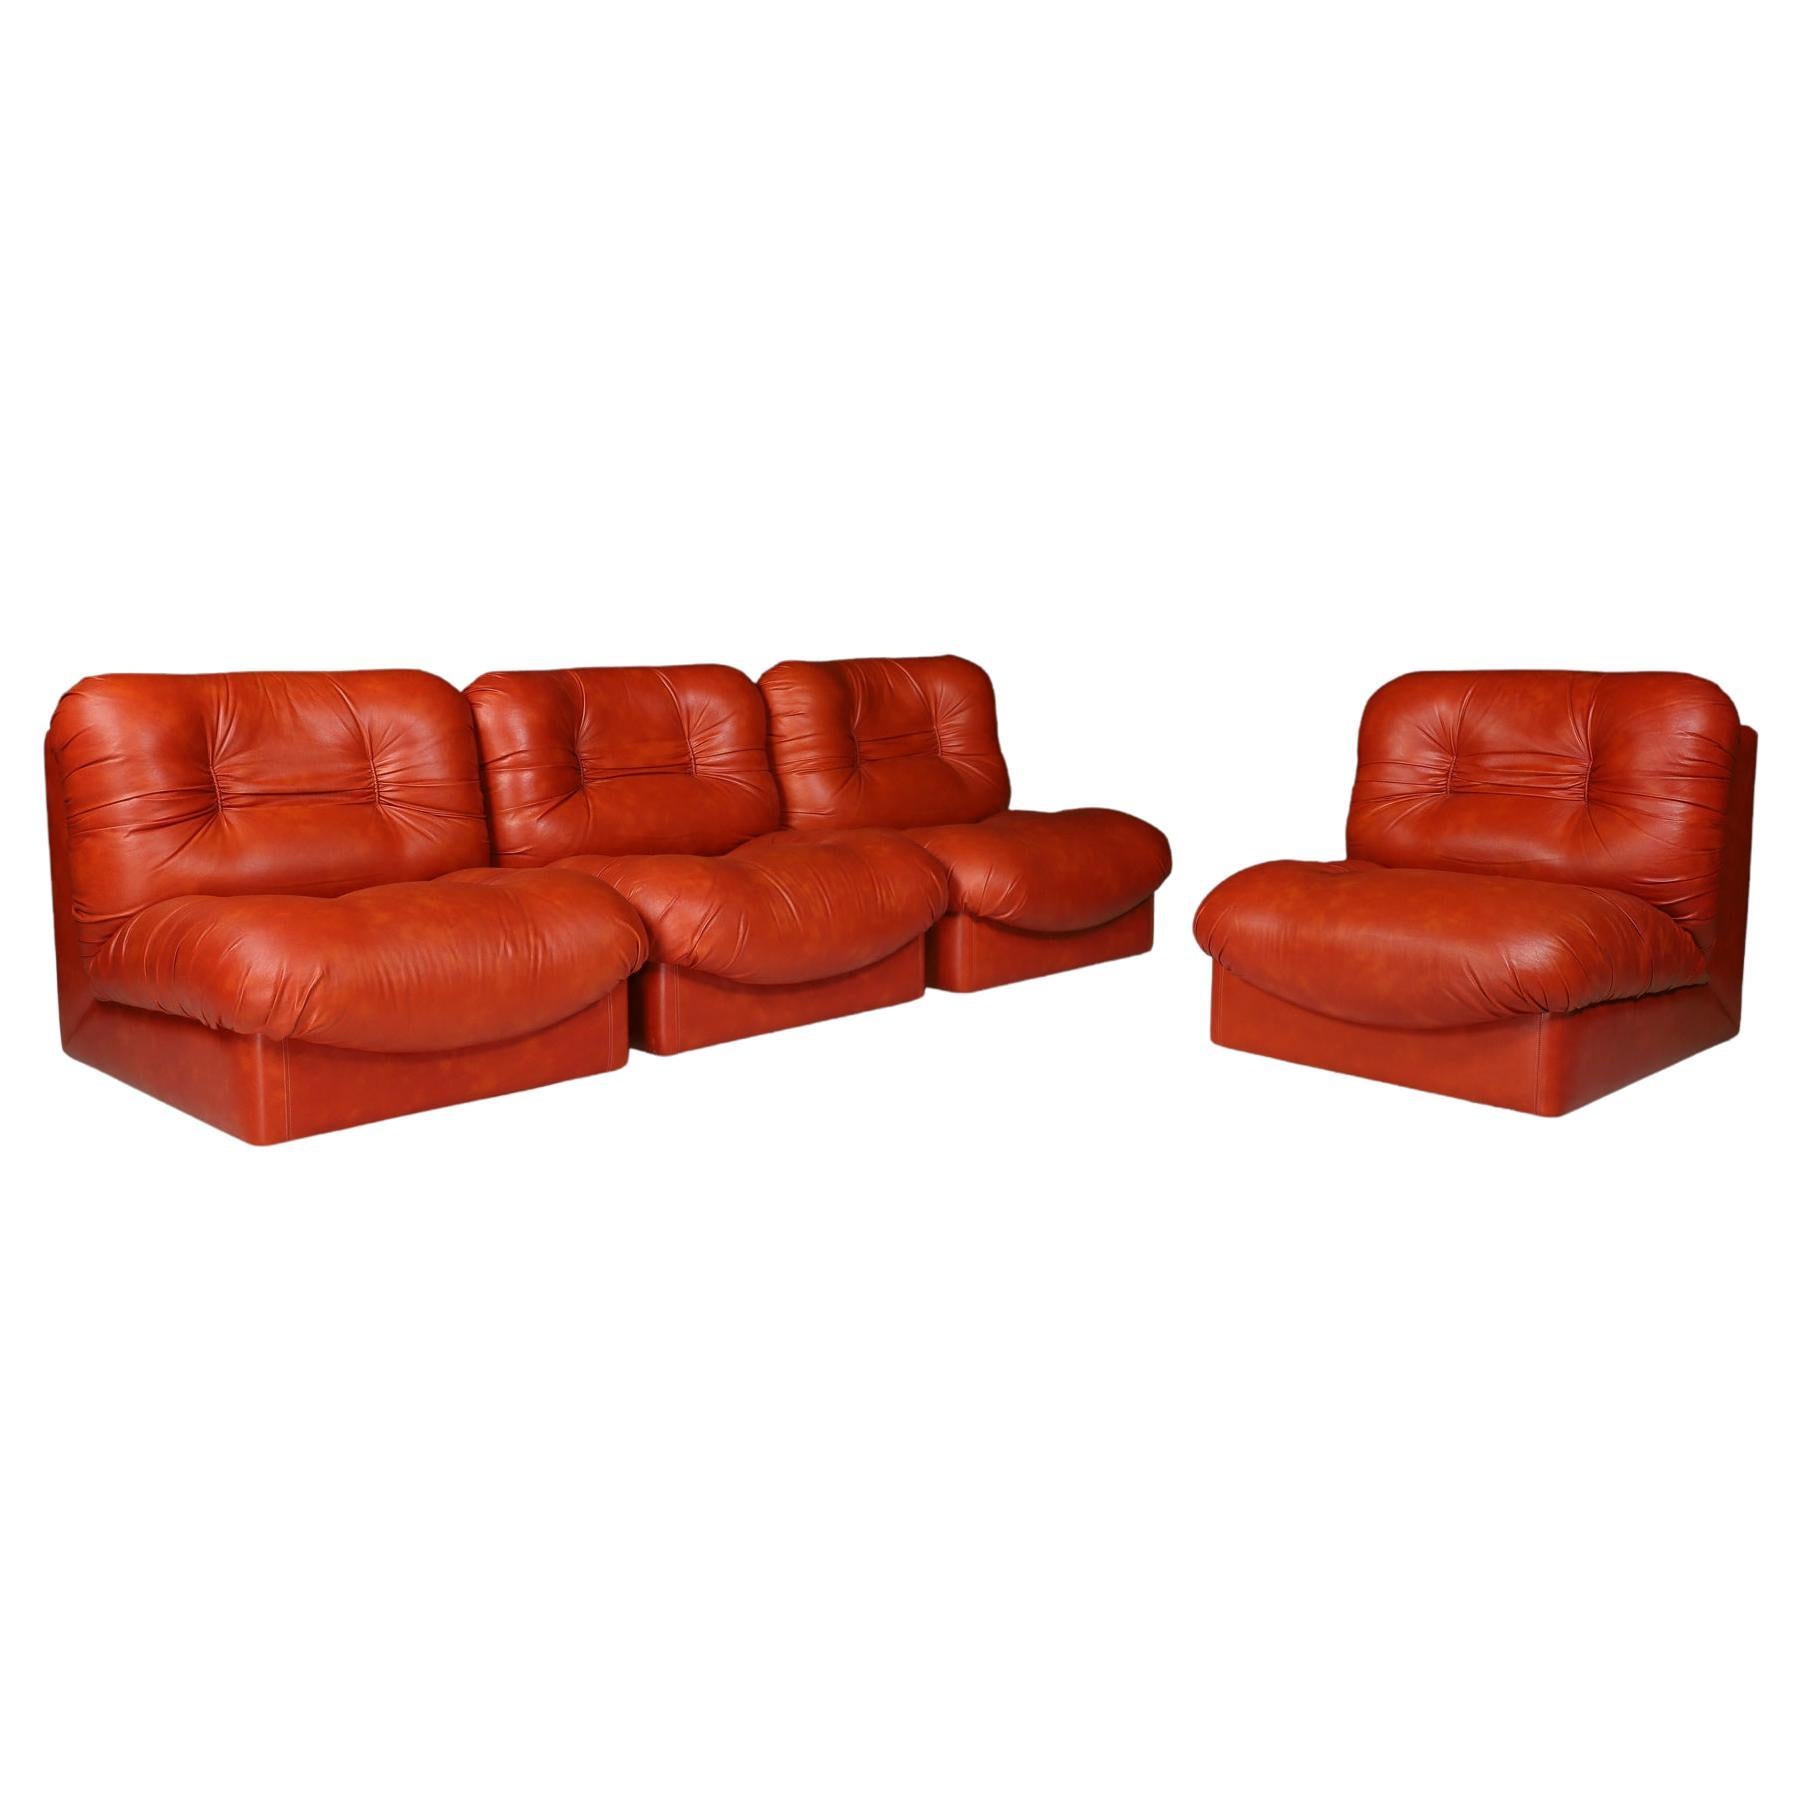 Set of Four Red Leather Mid century Lounge Chairs, Sofa , Italy 1970 For Sale